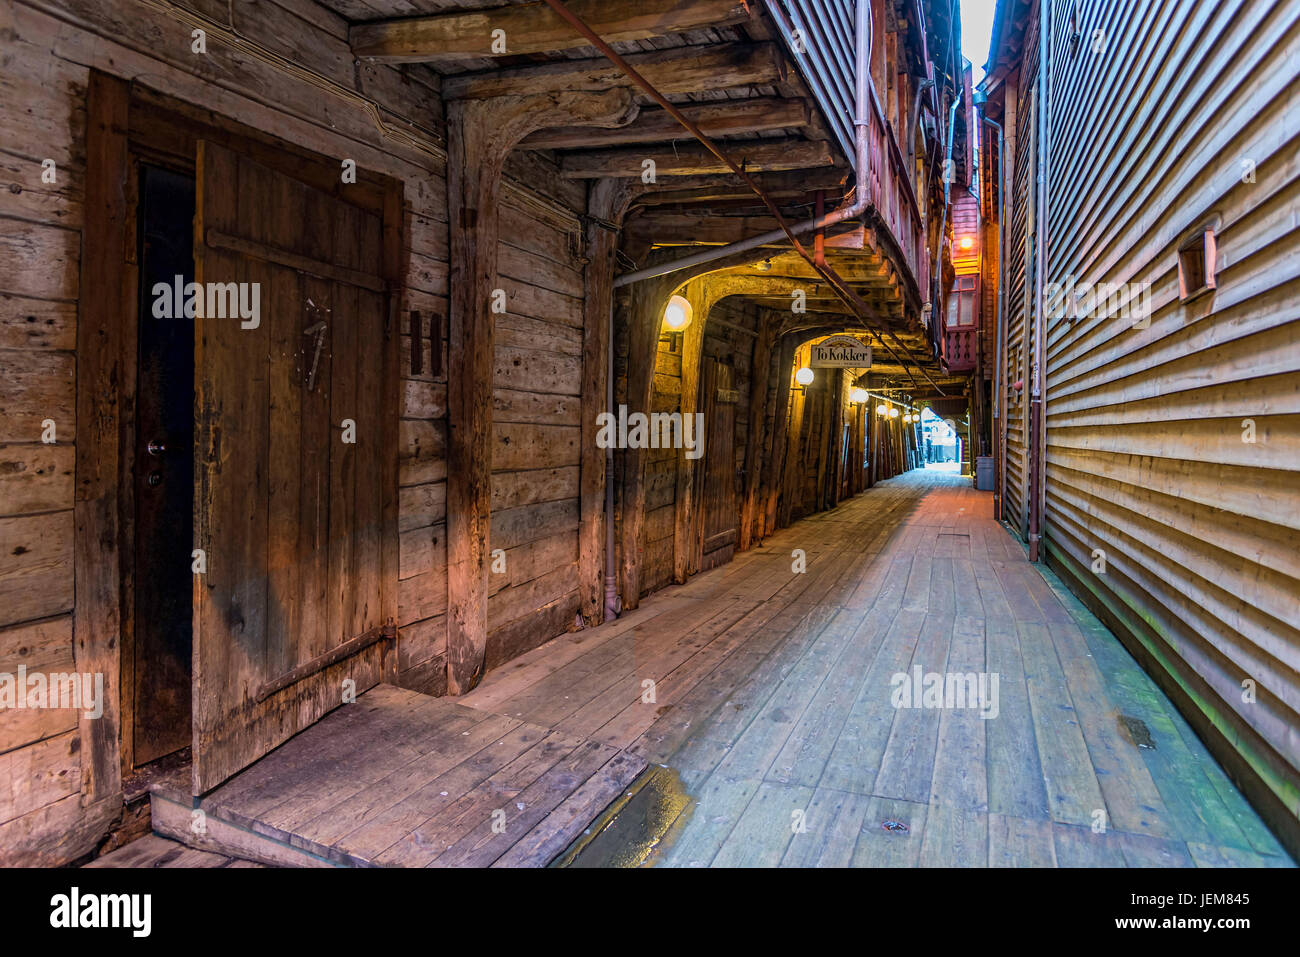 Bergen, Norway - August 14, 2016: A Narrow passage in the Bryggen district. Is a series of Hanseatic commercial buildings Stock Photo